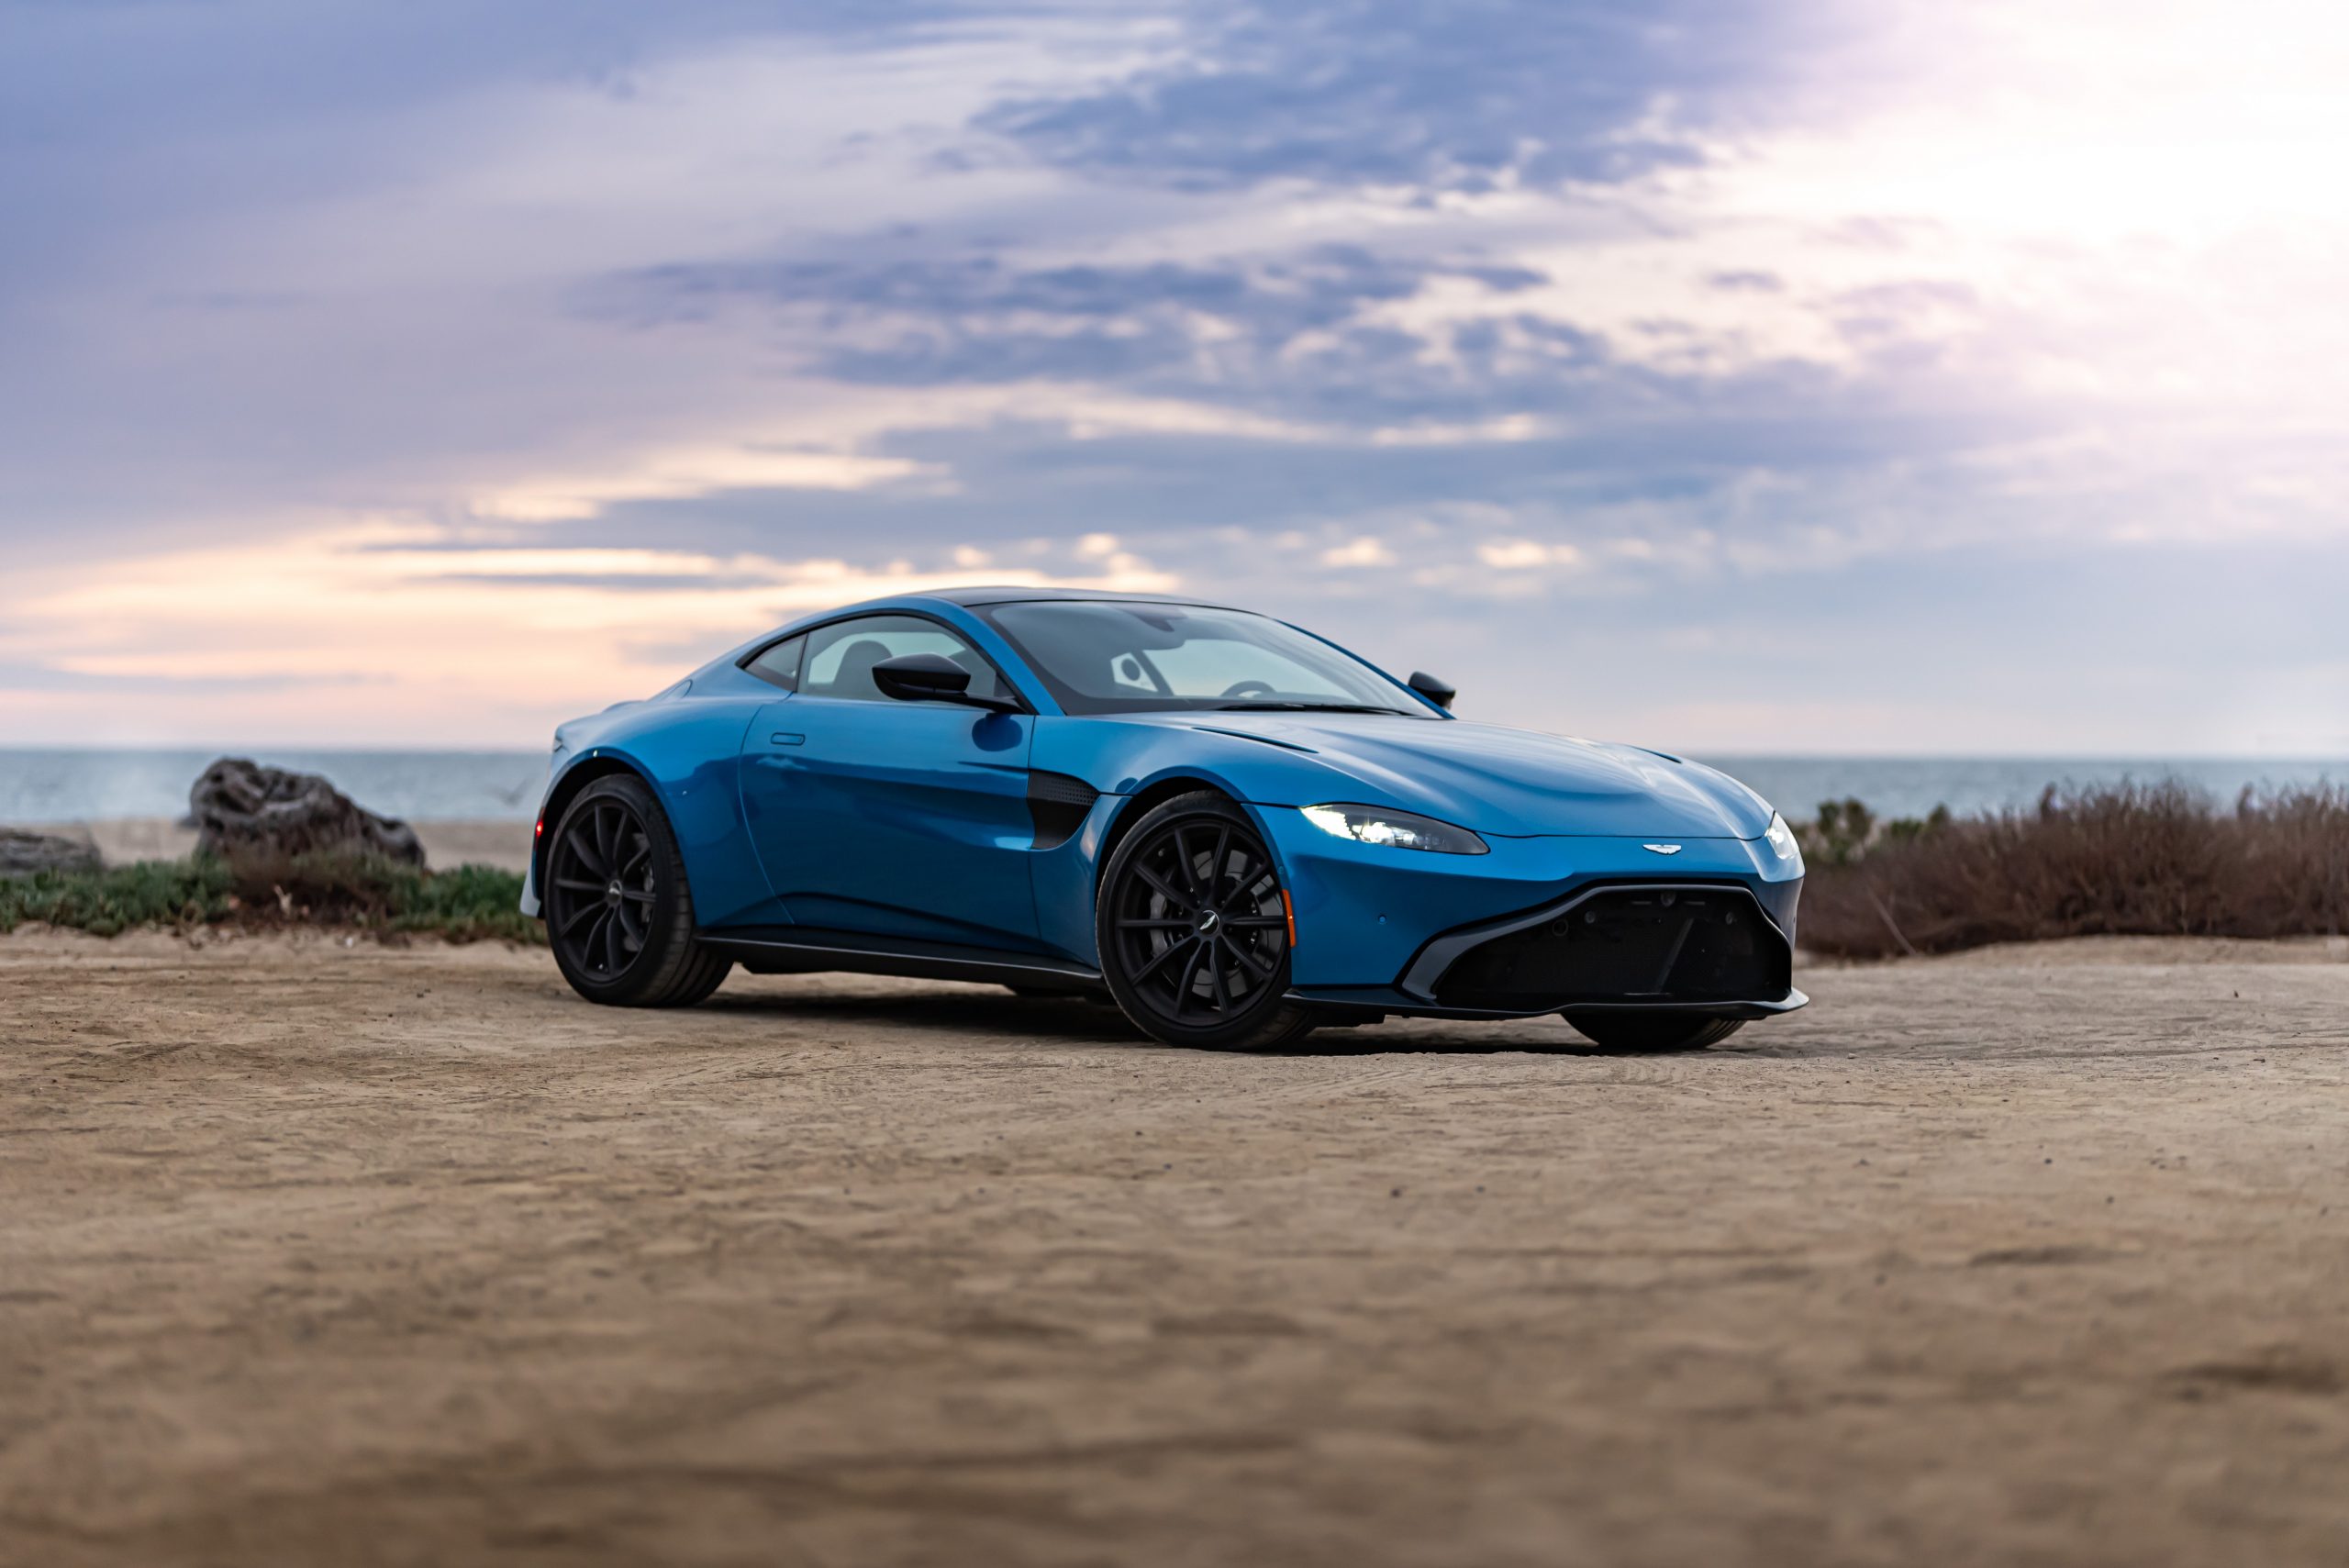 Driving on Road and Track in the Aston Martin Vantage F1 Edition